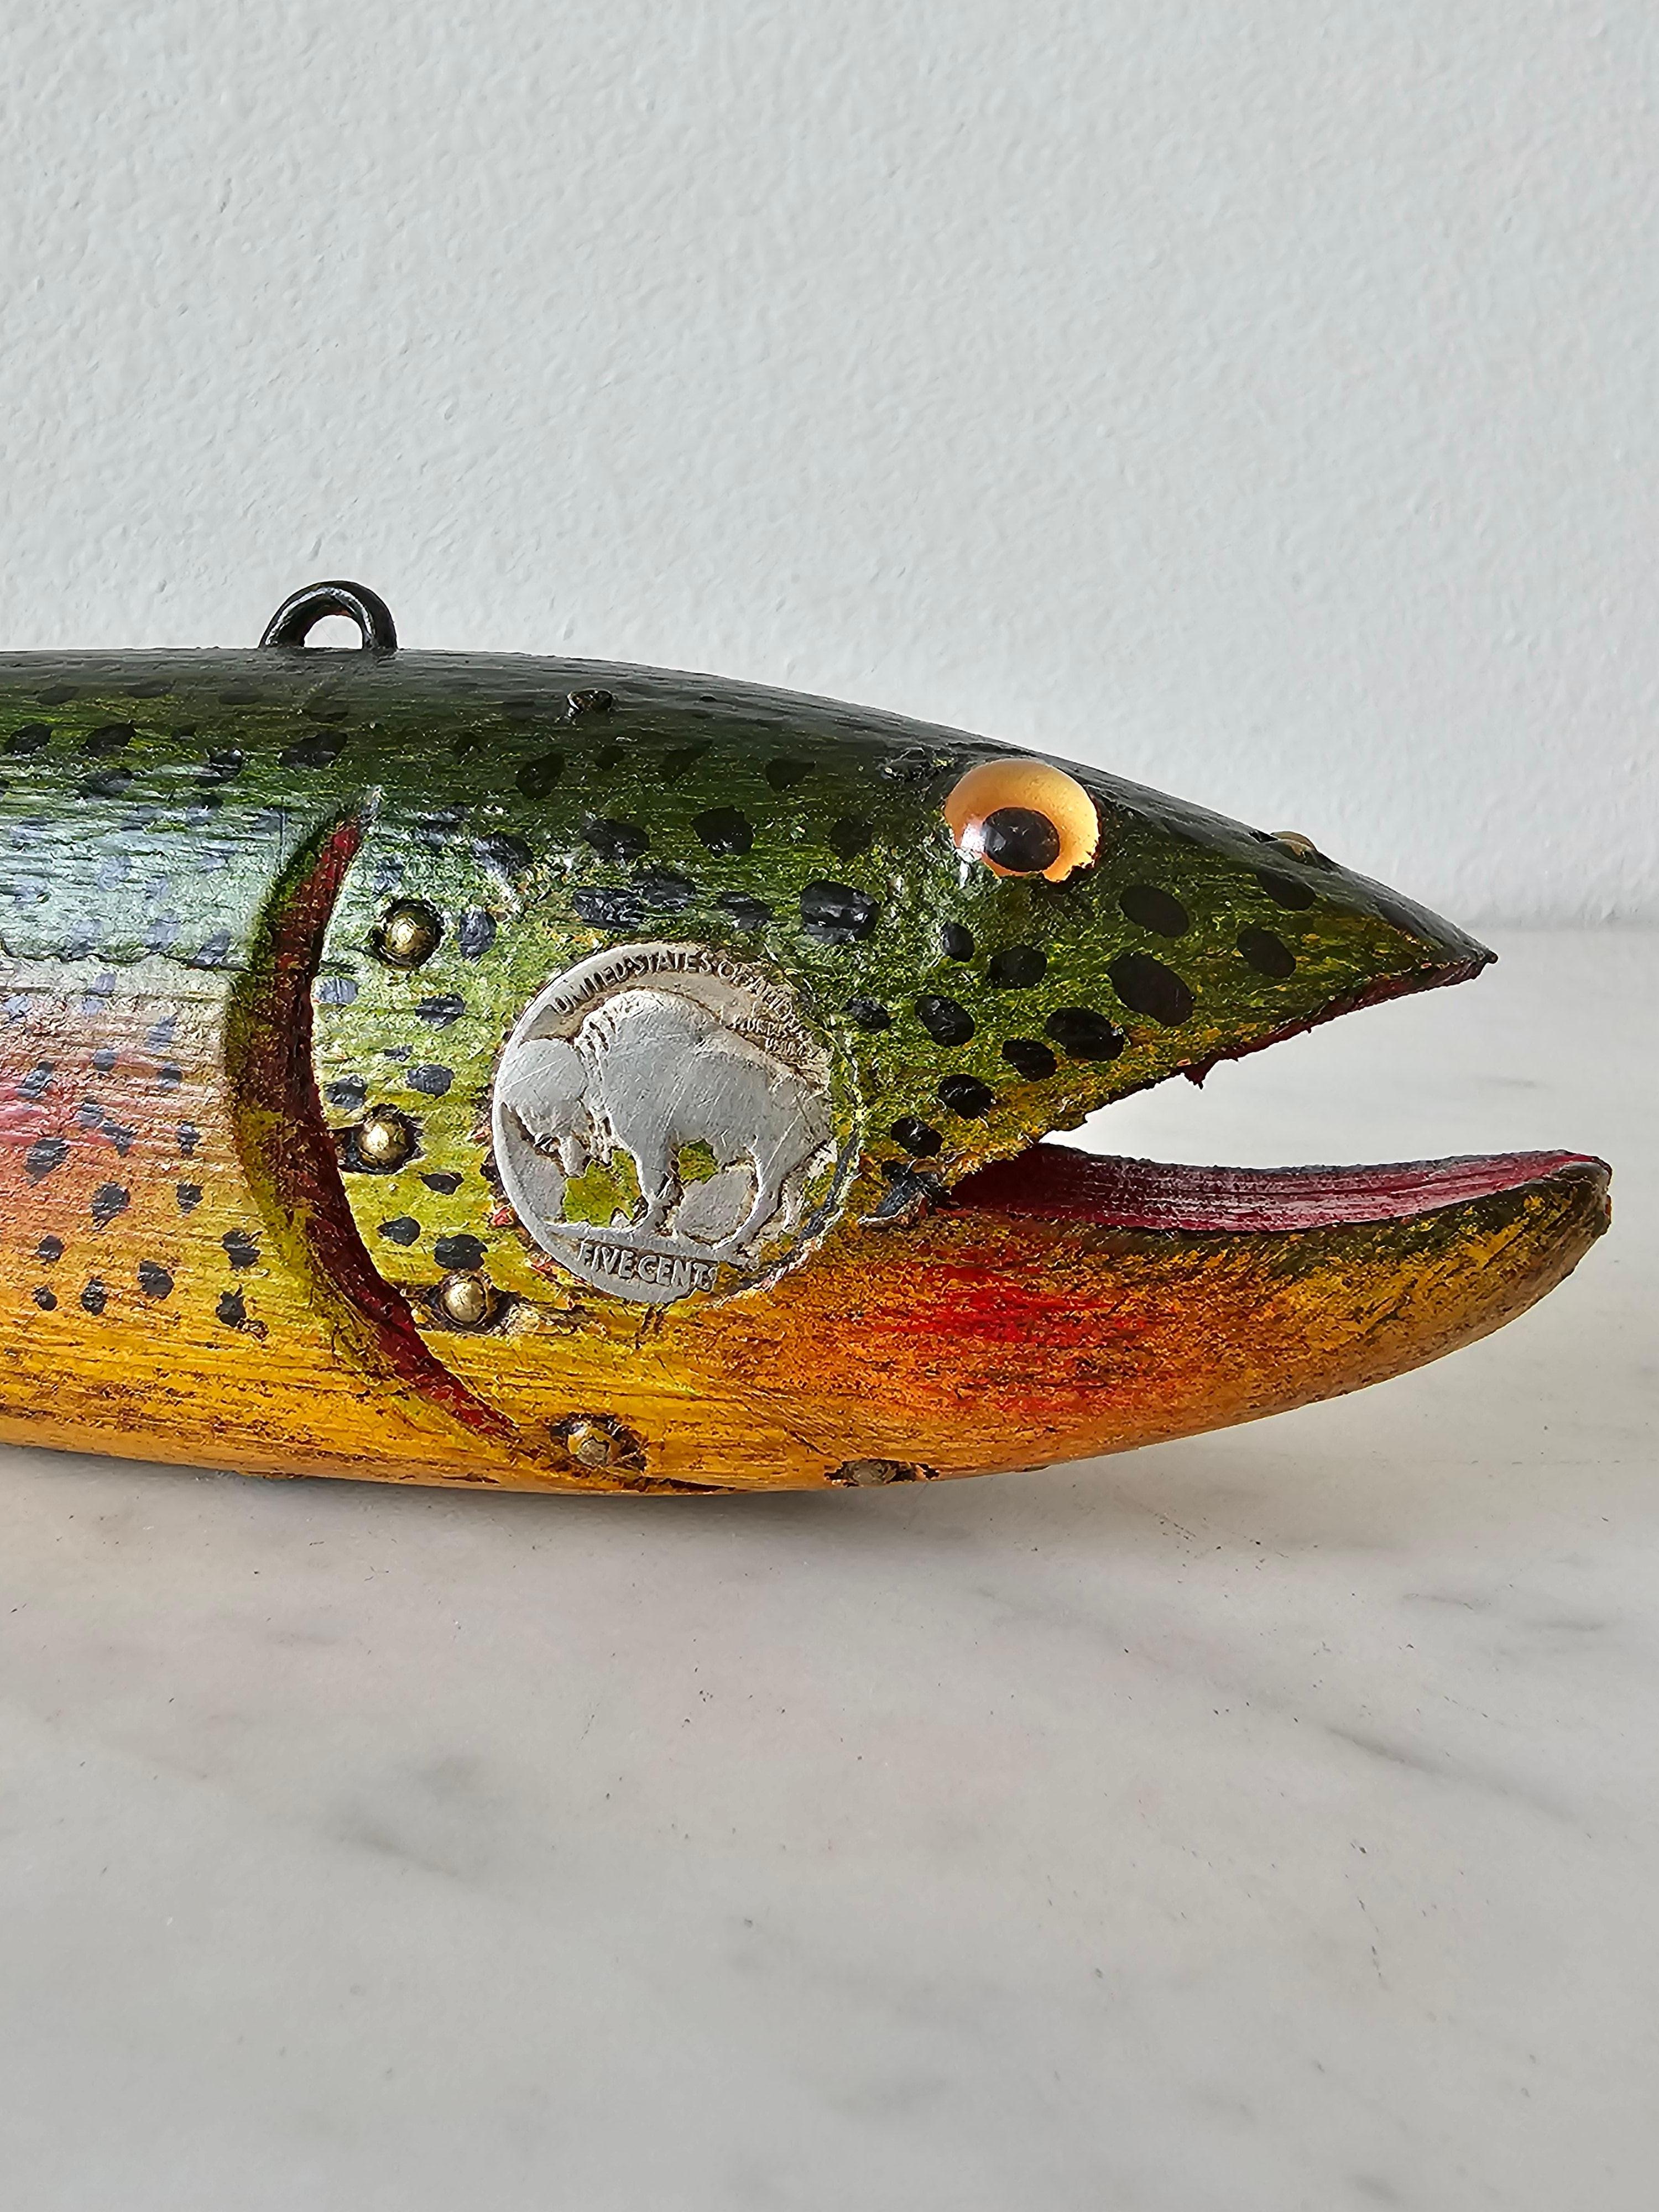 Wood Vintage American Folk Art Duluth Fish Decoy Dfd Signed Carved Painted Trout